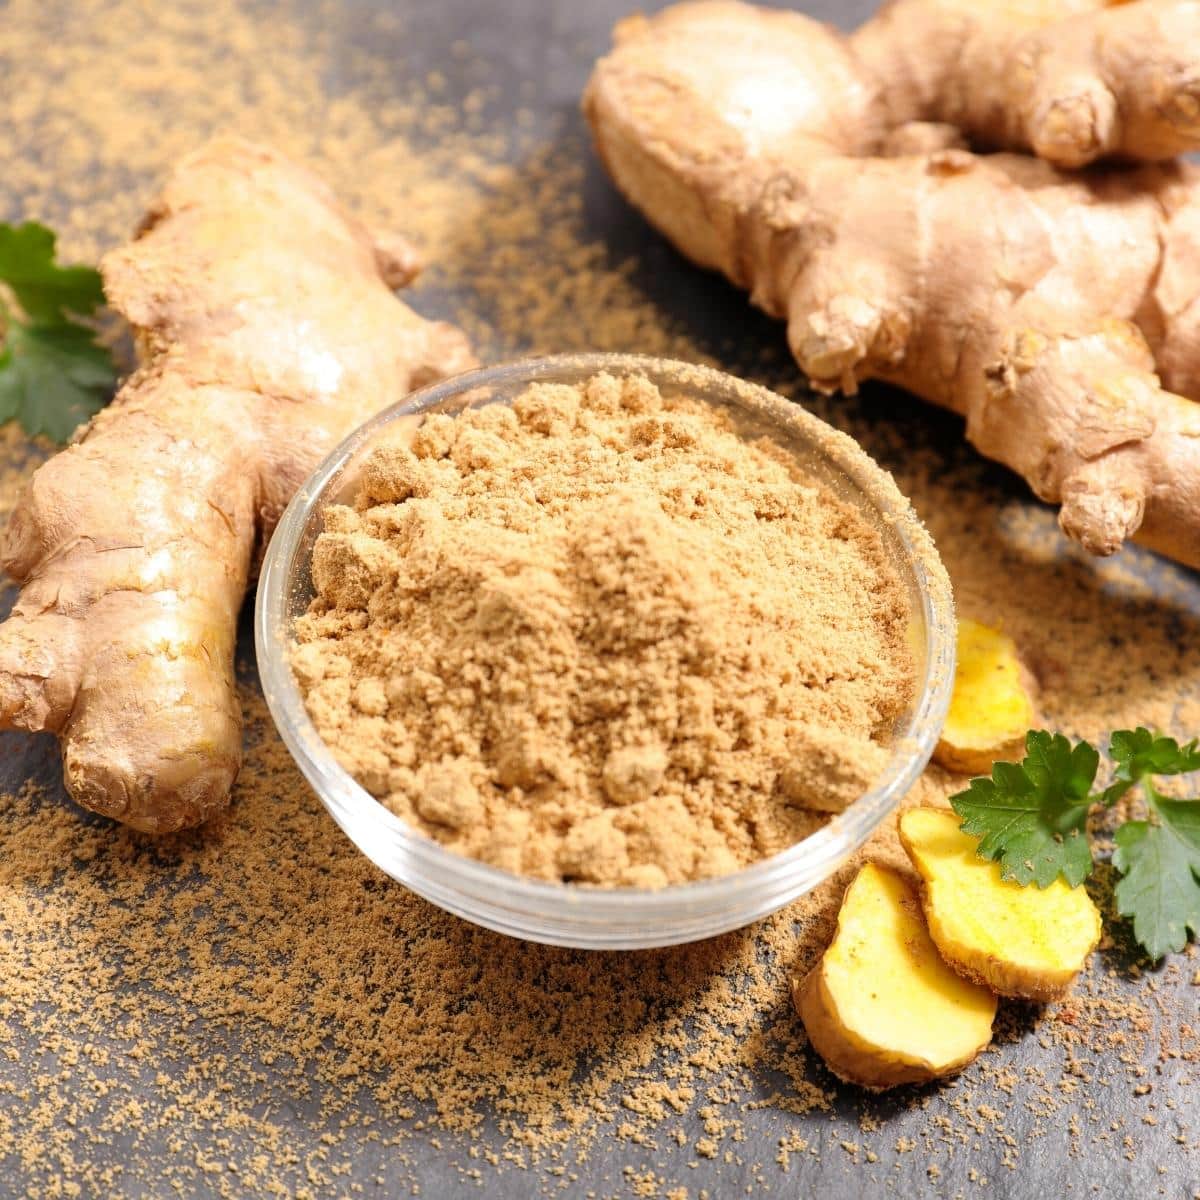 A small glass bowl of ground ginger.